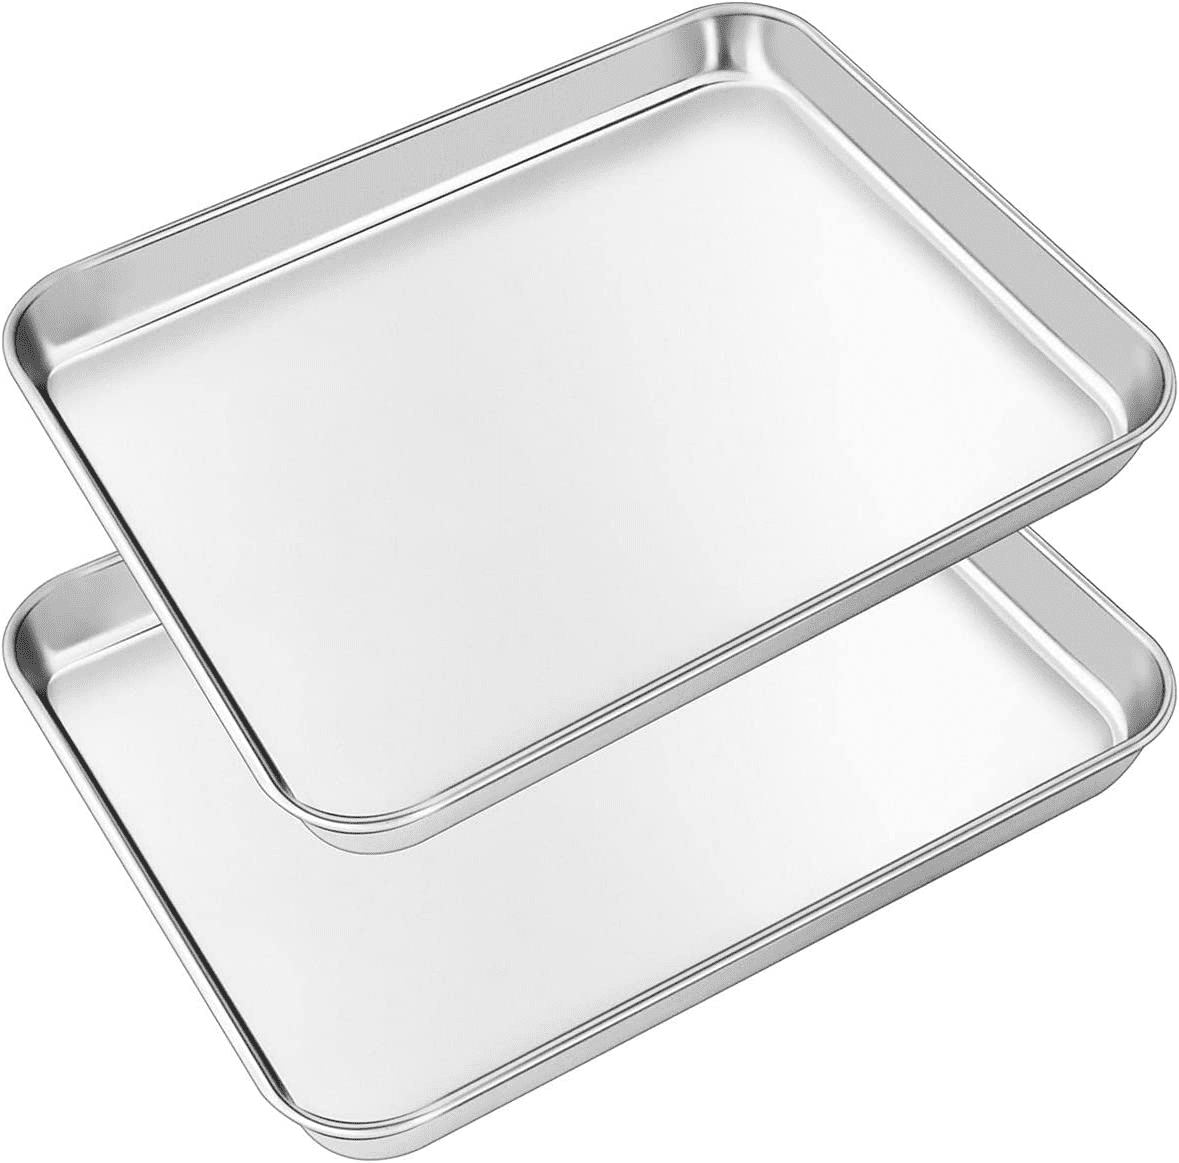 Vesteel Toaster Oven Pan Set of 2, 12.5 x 9.7 x 1 inch Stainless Steel Cookie Baking Pan Oven Tray, Corrugated Bottom & Dishwasher Safe - Rectangular